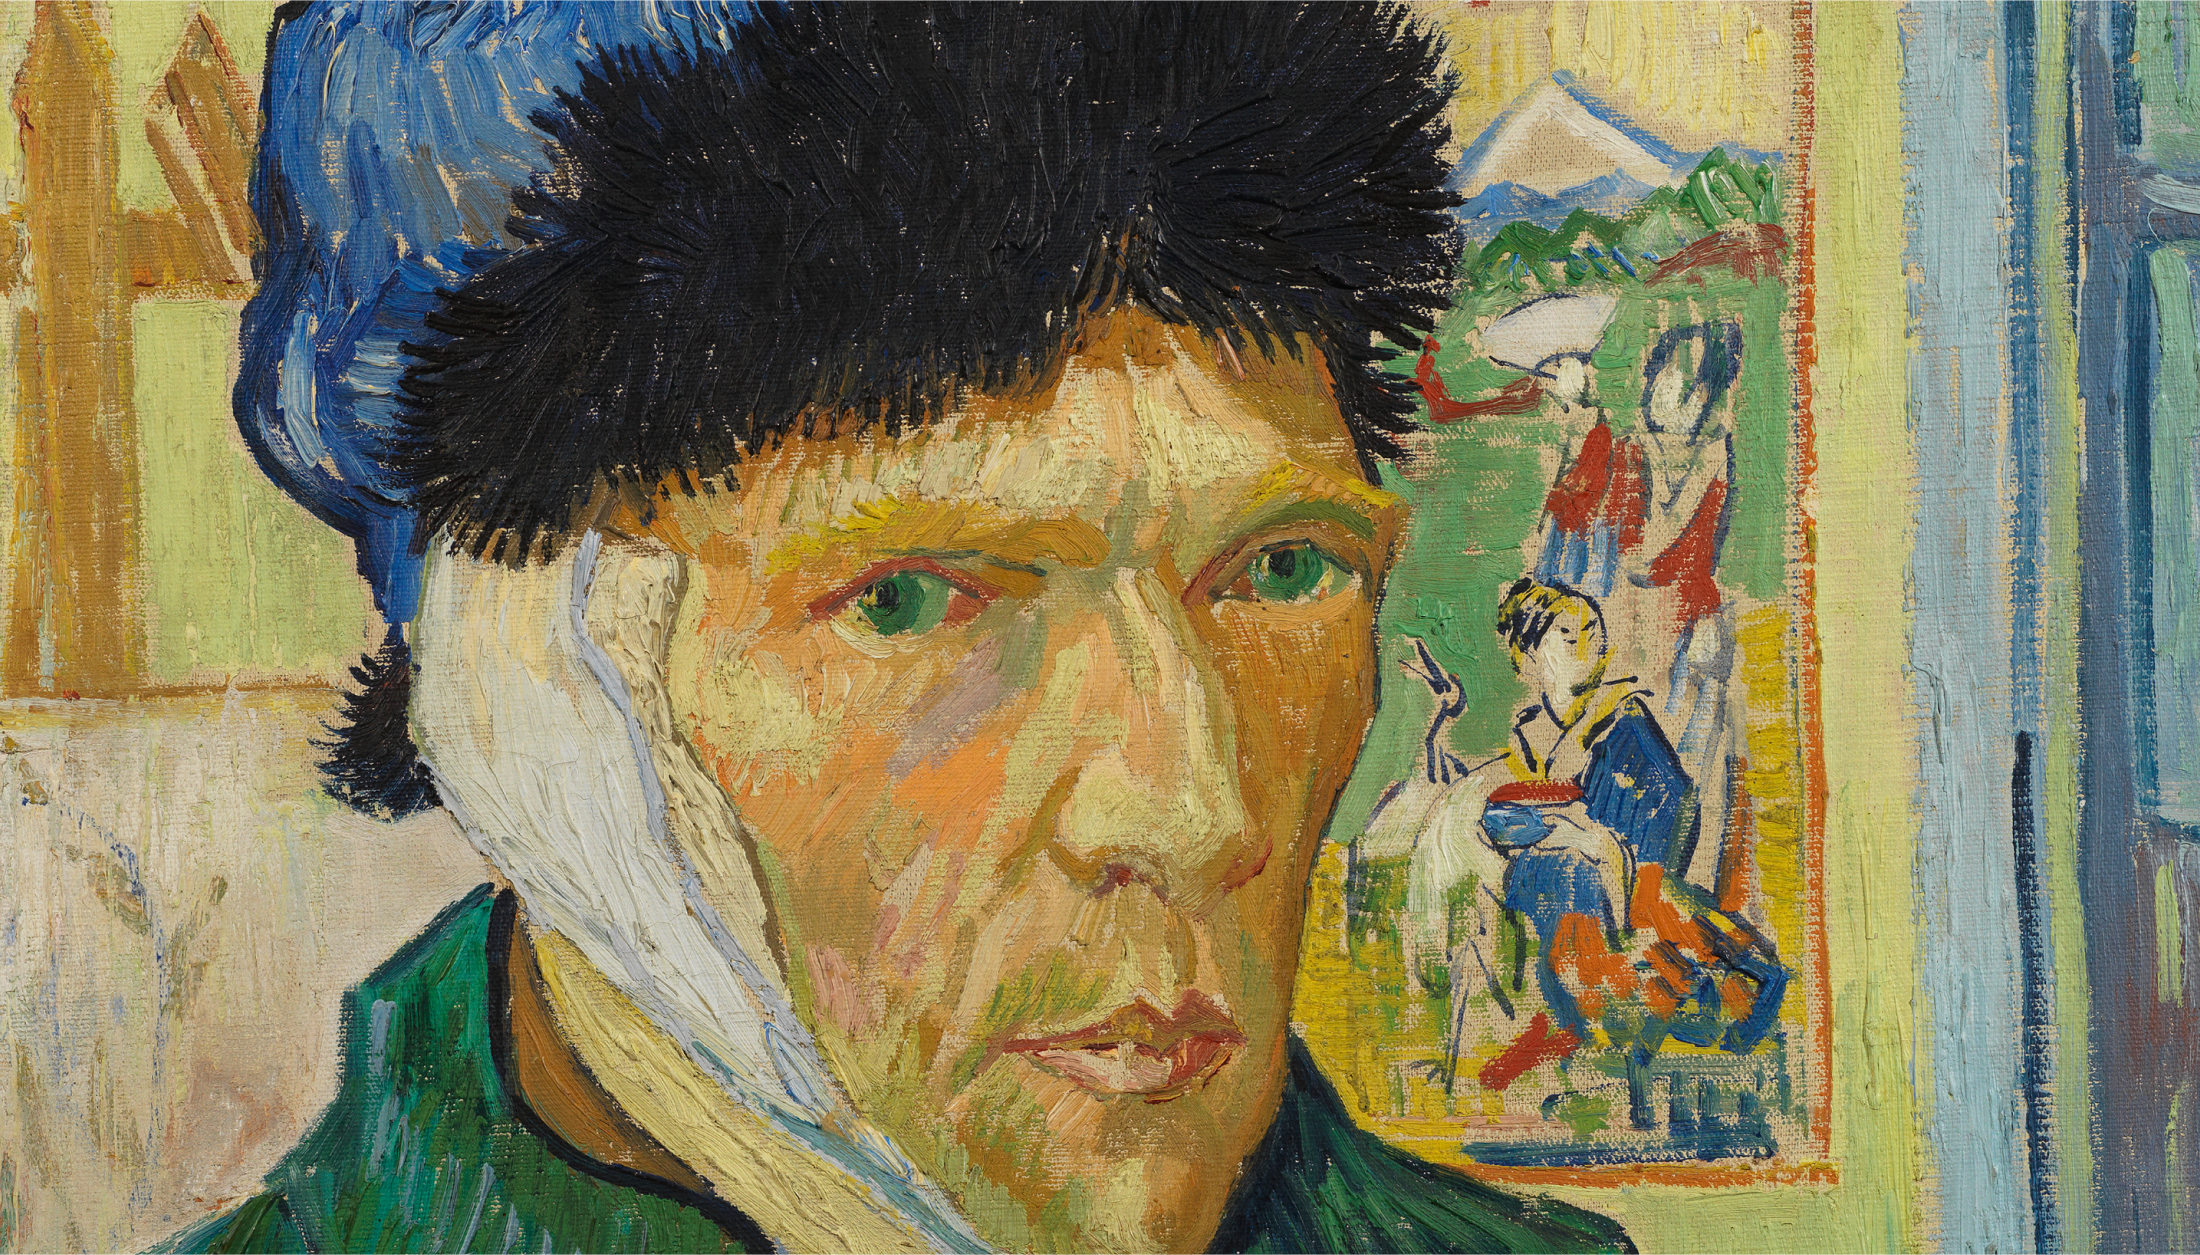 A detail from <i>Self-Portrait with Bandaged Ear</i>, 1889, oil on canvas by Vincent van Gogh (1853–1890). Image credit : The Courtauld